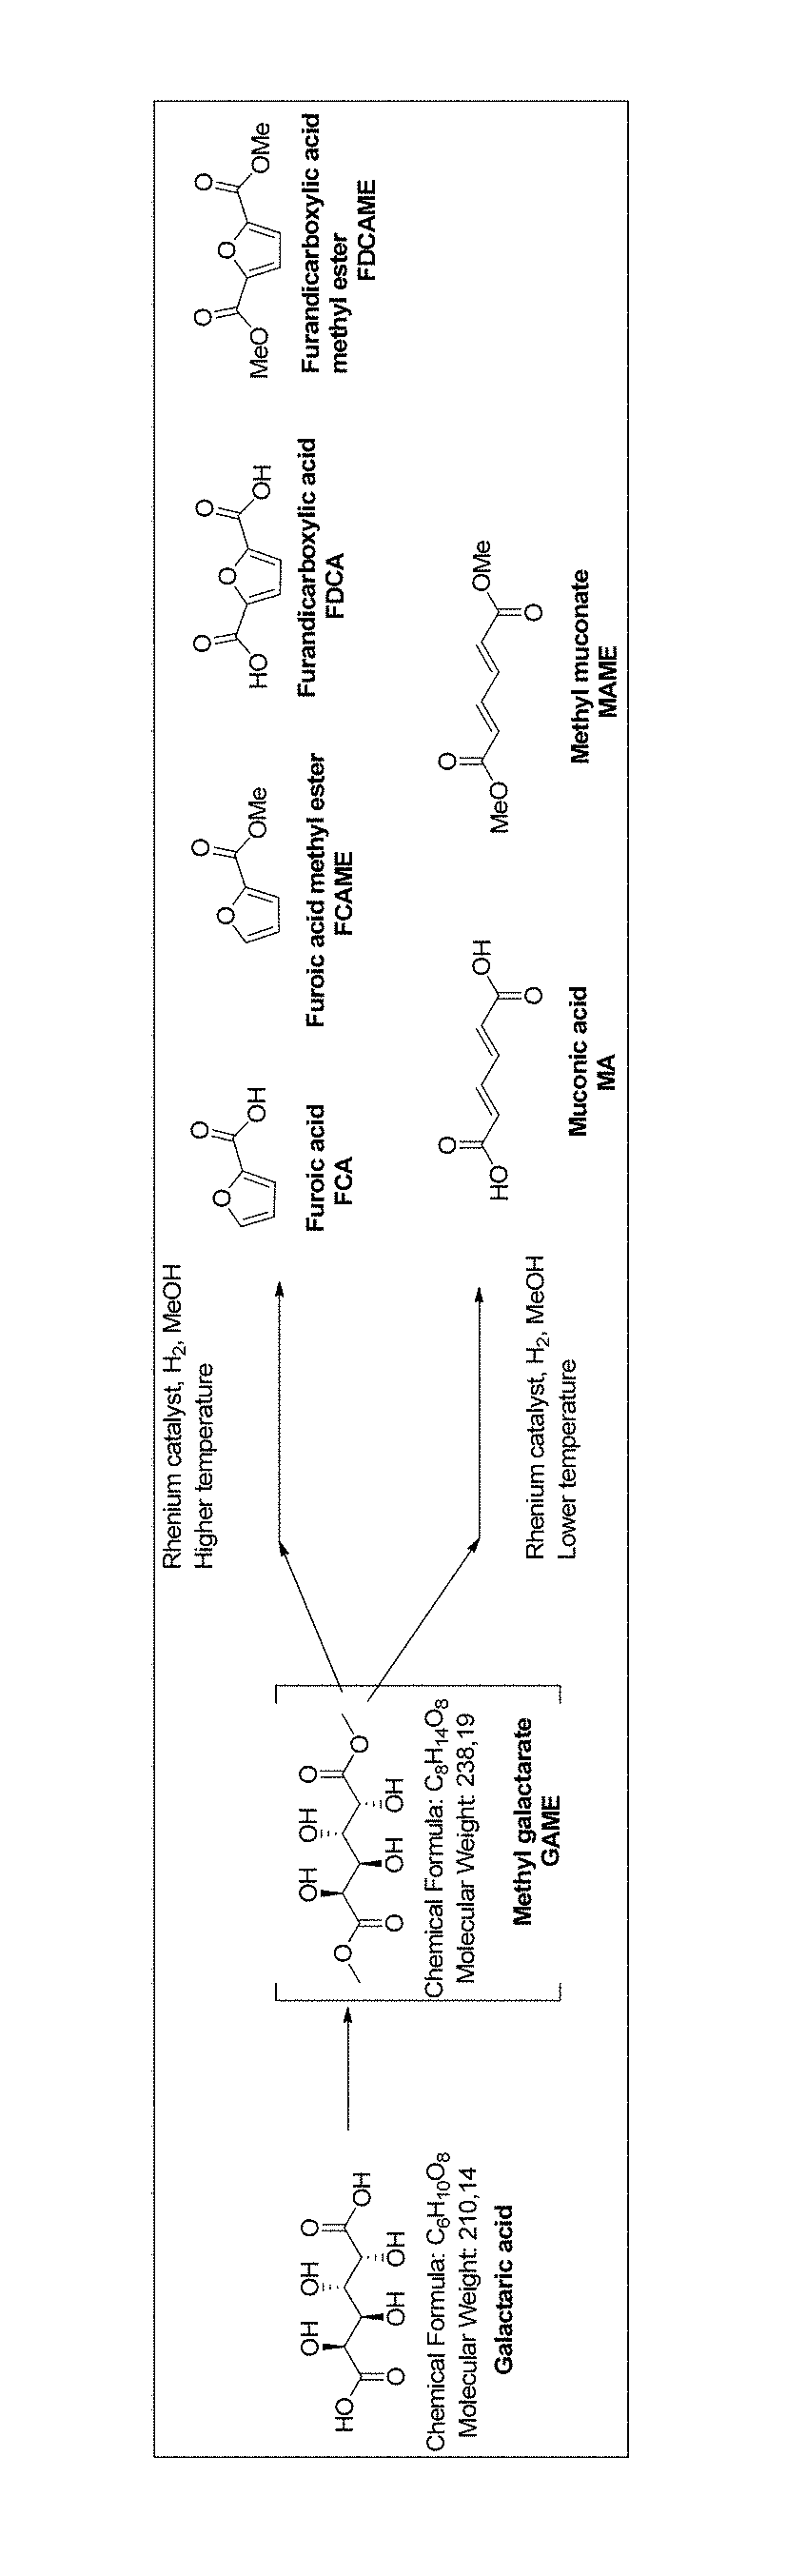 Method for producing muconic acids and furans from aldaric acids